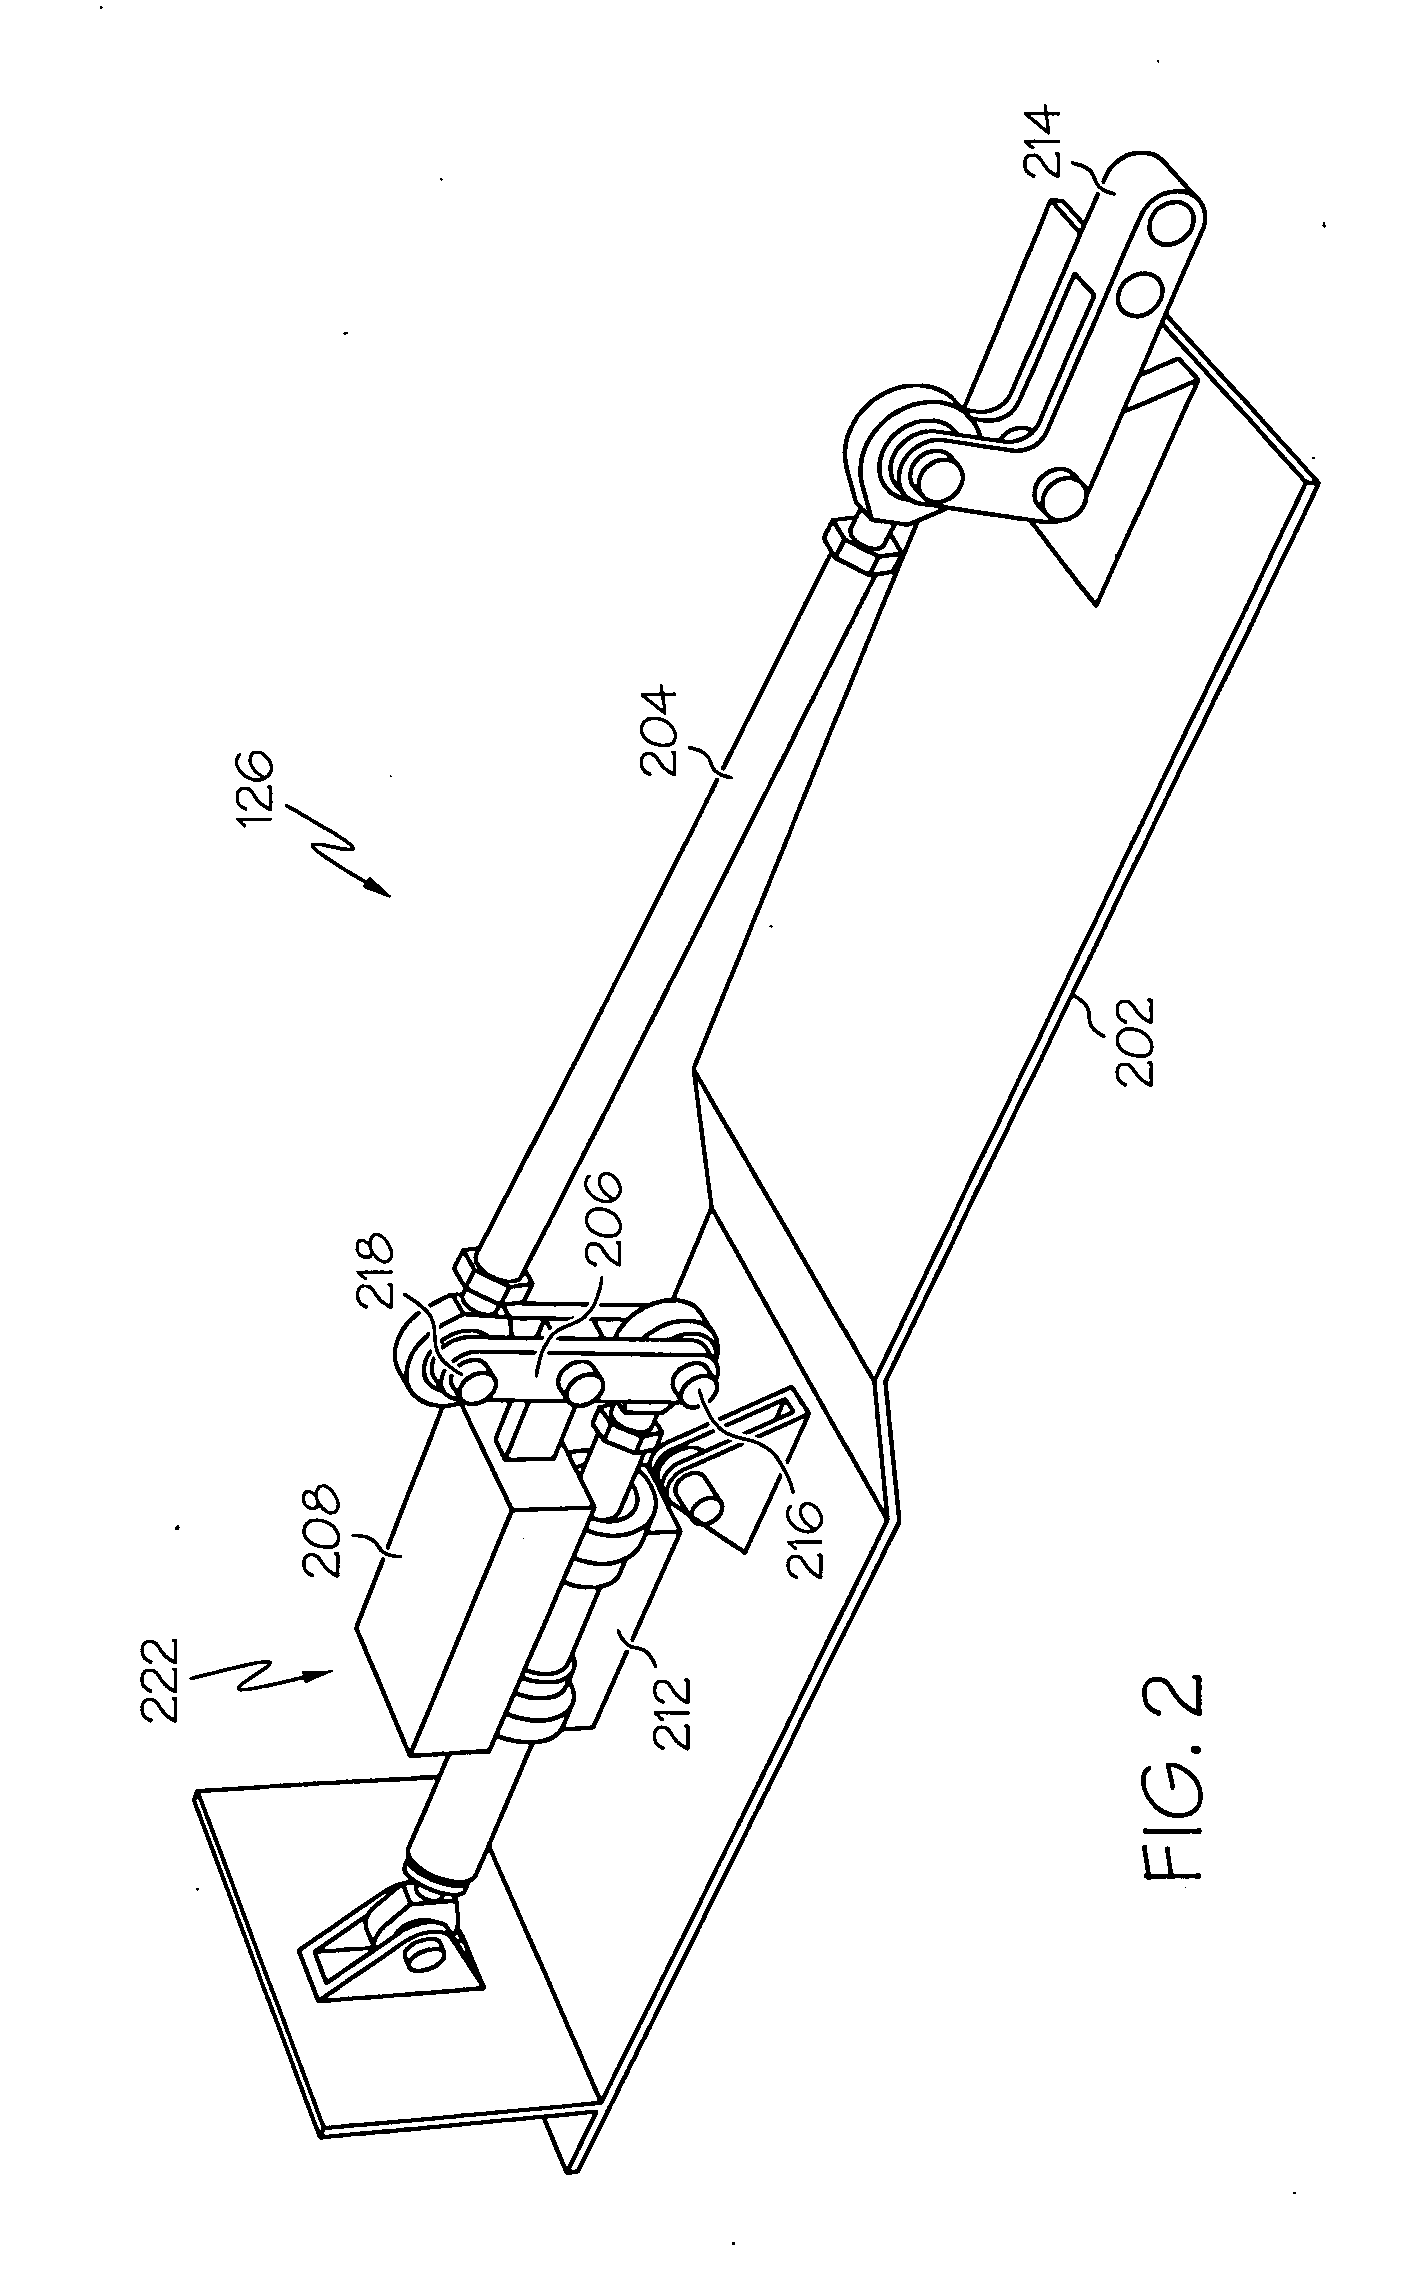 Hybrid electromechanical/hydromechanical actuator and actuation control system